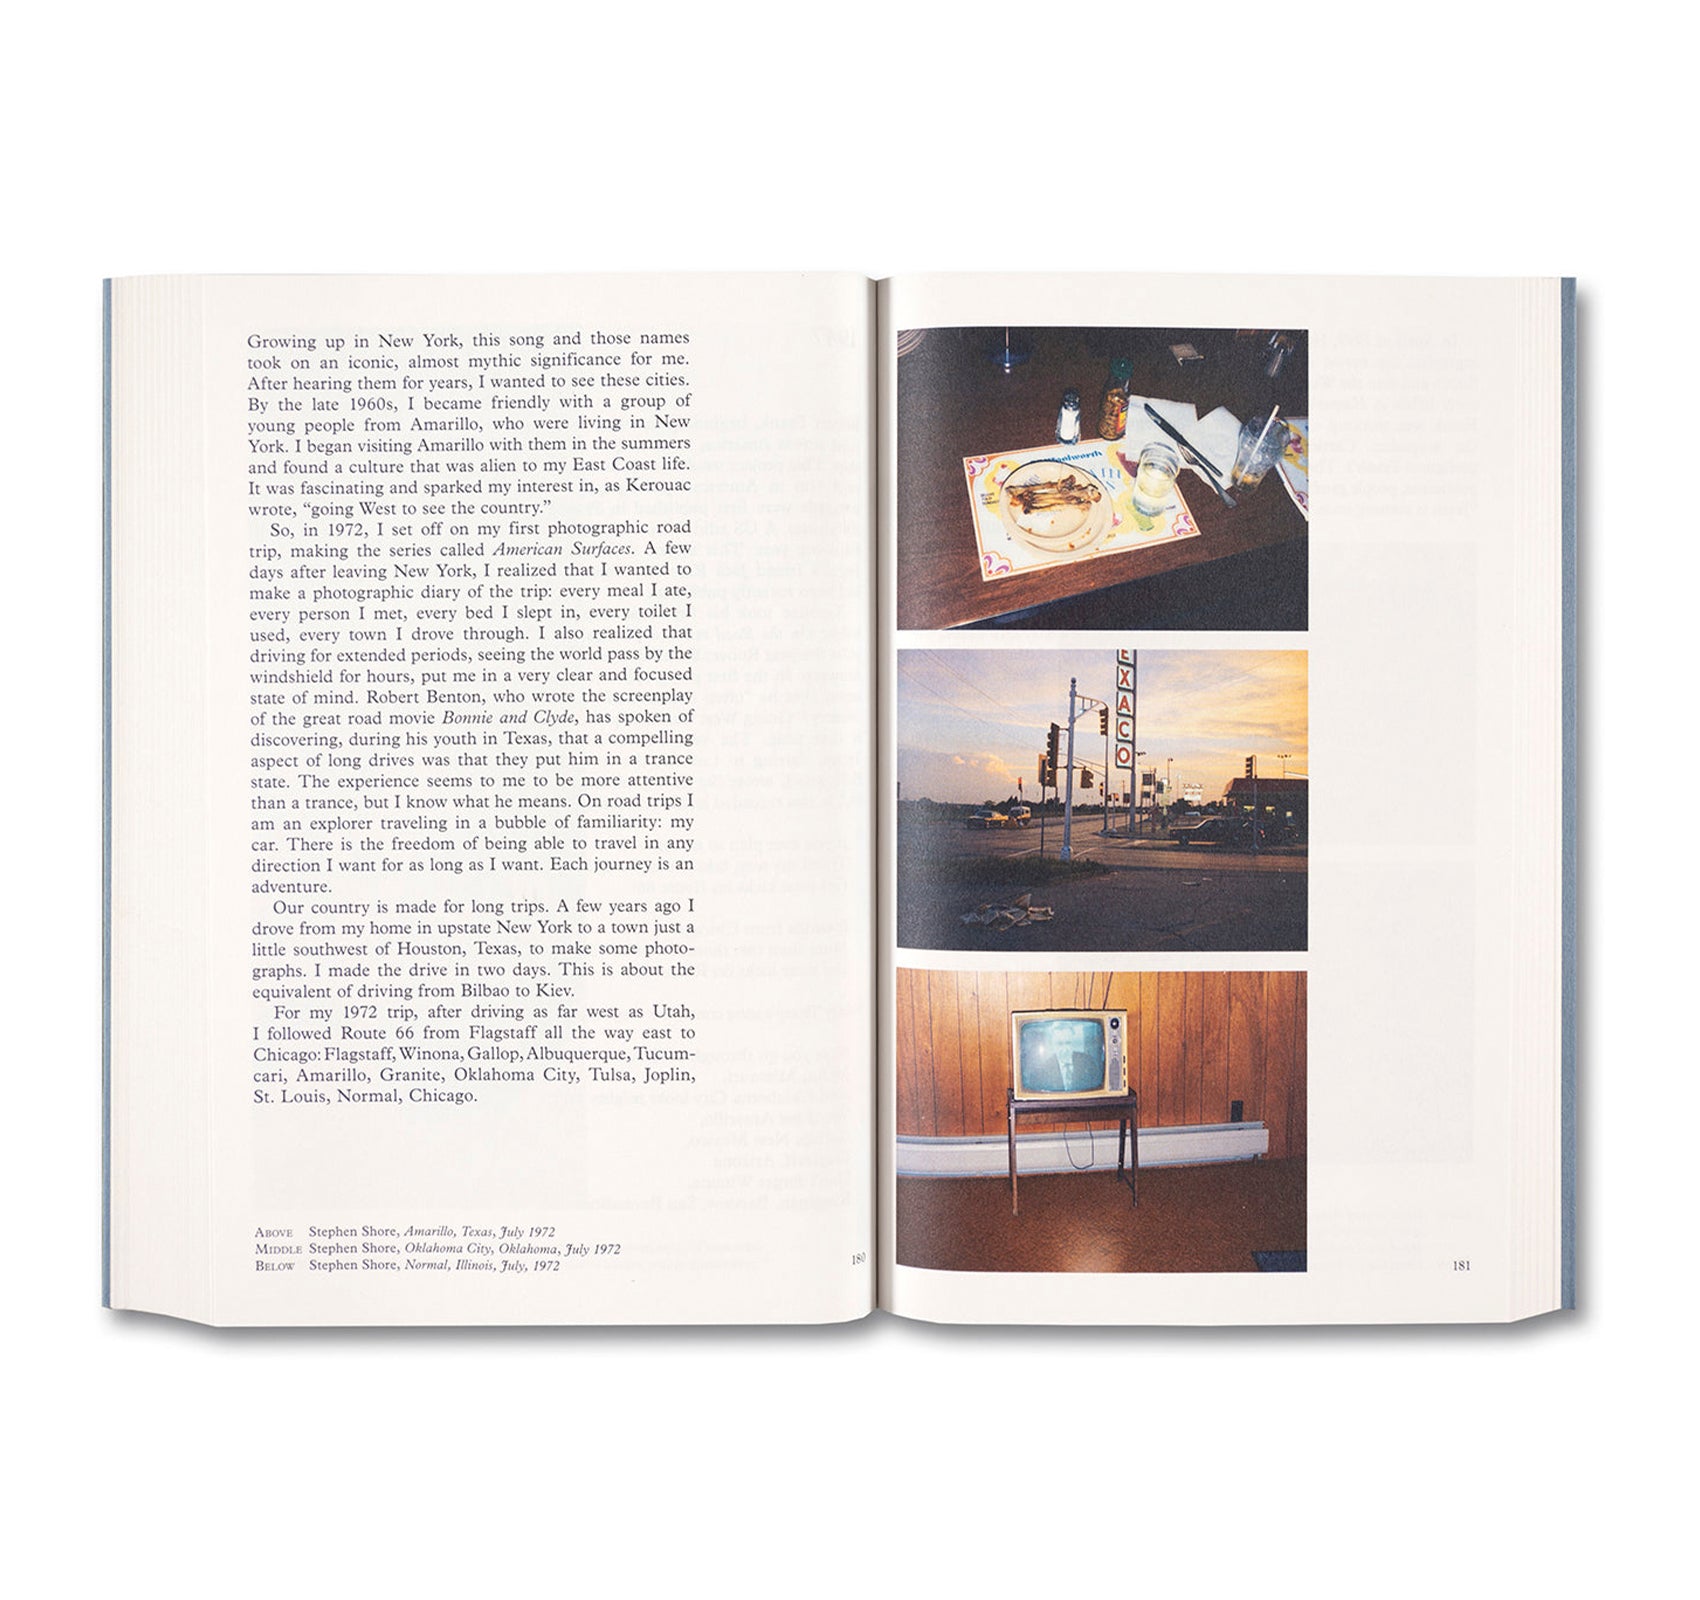 MODERN INSTANCES: THE CRAFT OF PHOTOGRAPHY by Stephen Shore [EXPANDED EDITION / SIGNED]